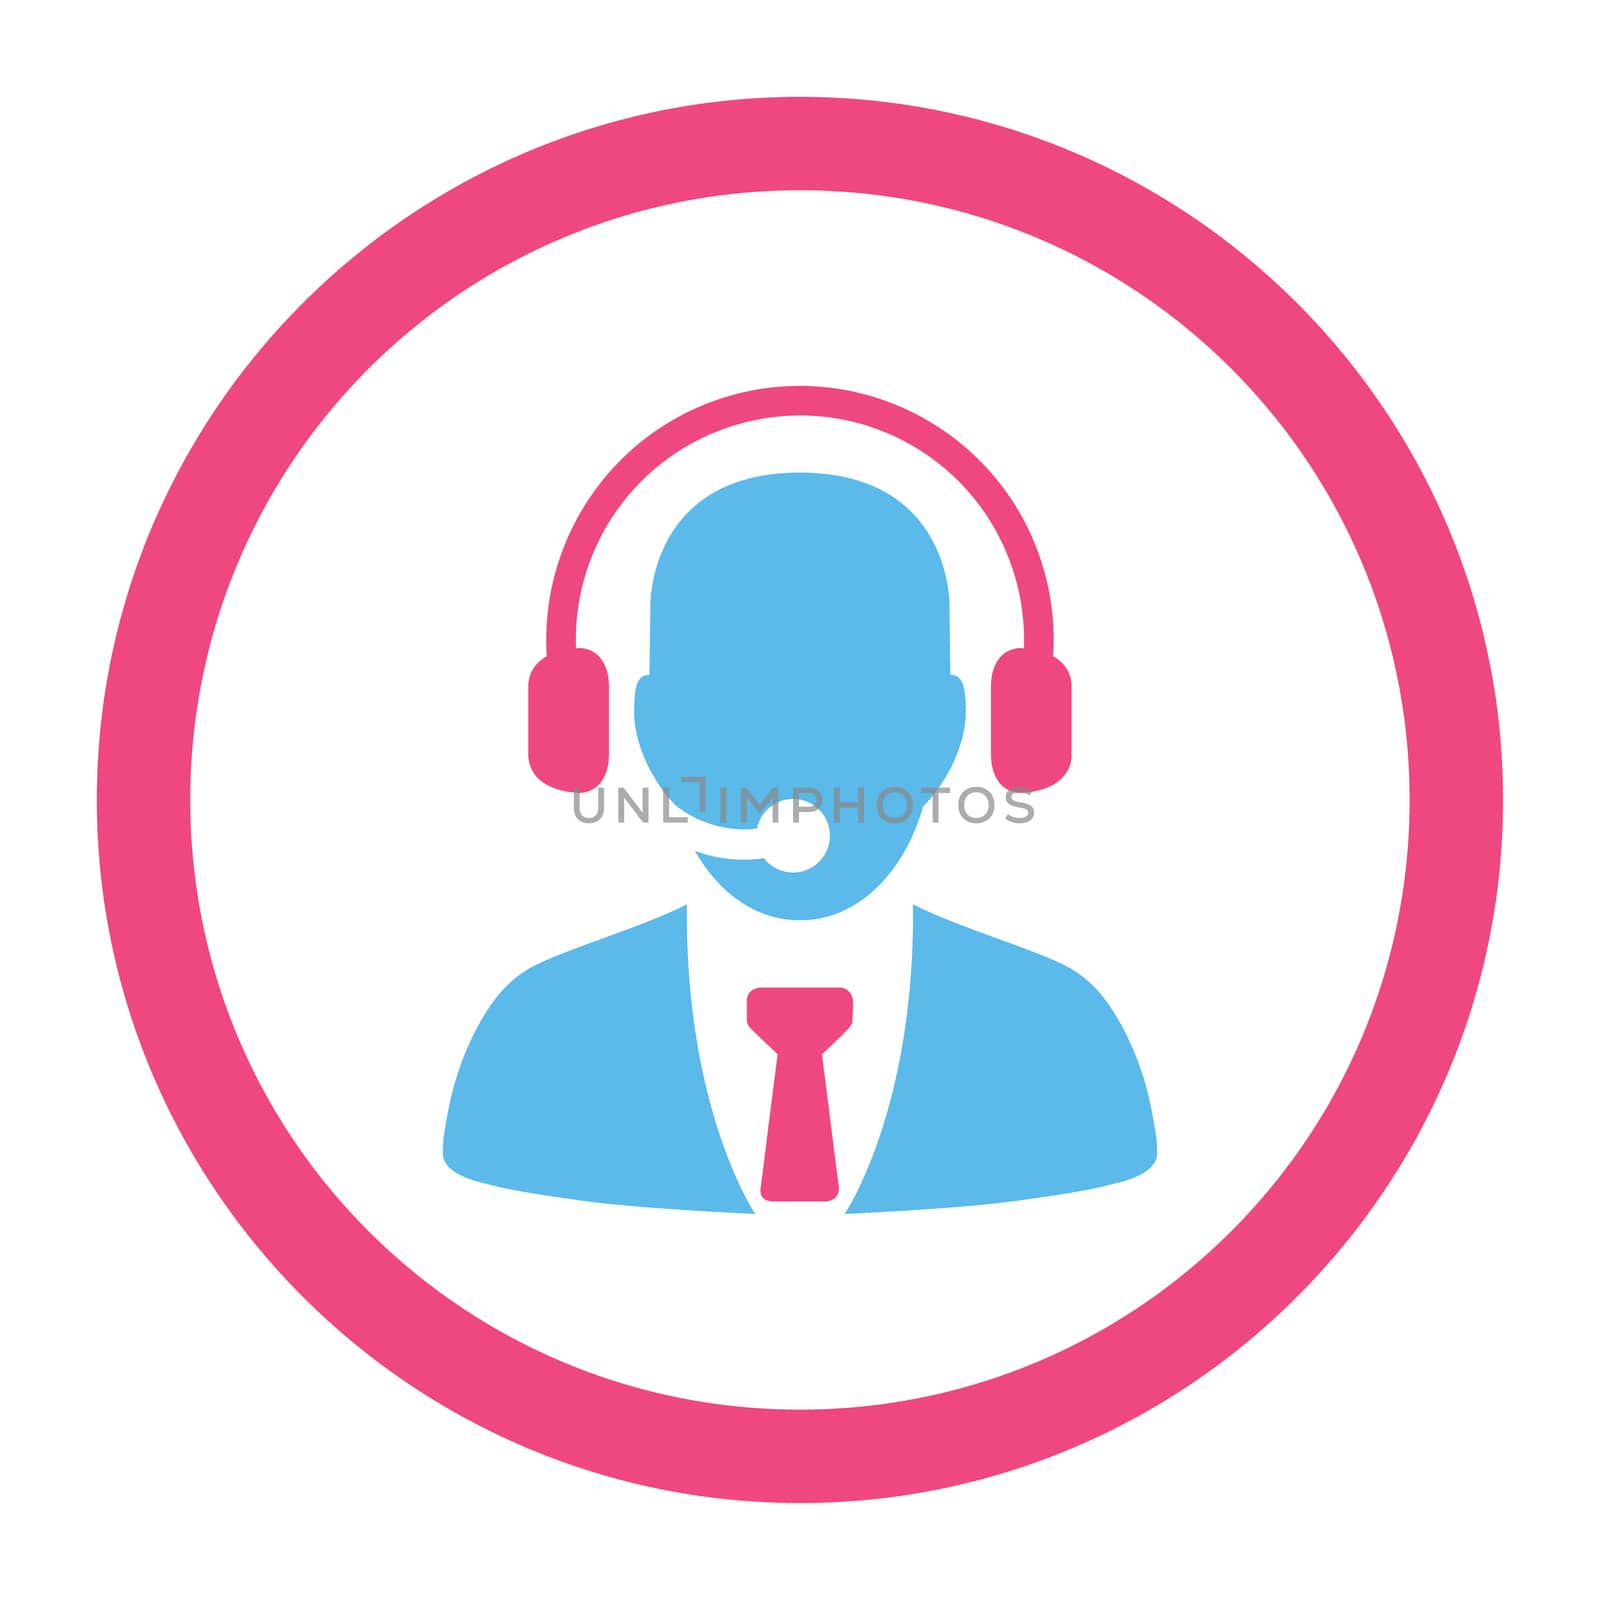 Call center glyph icon. This rounded flat symbol is drawn with pink and blue colors on a white background.